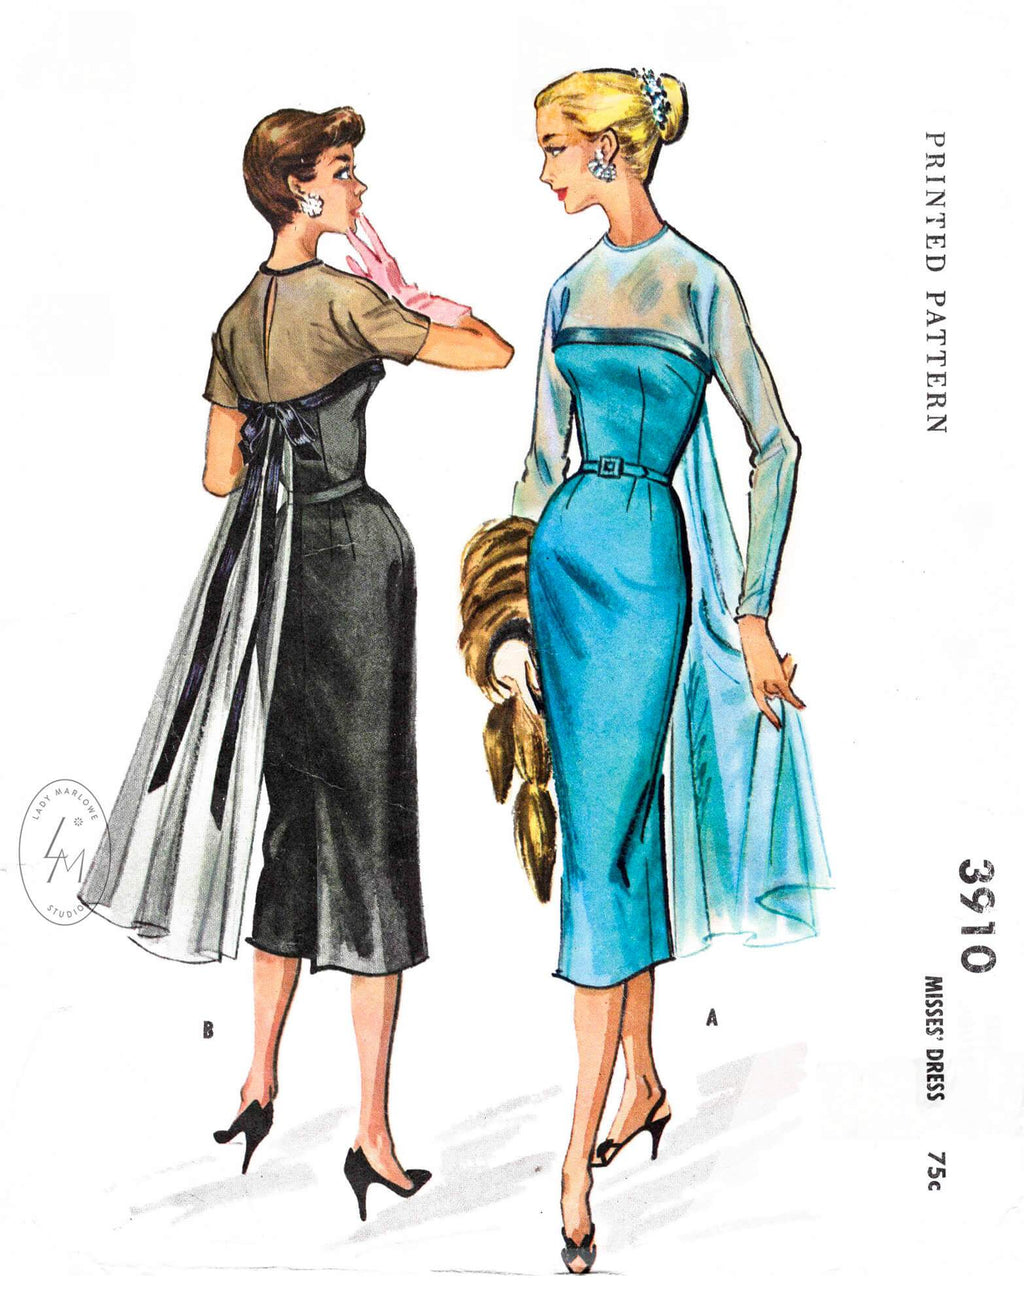 1950s 1956 cocktail party dress McCall's 3910 wiggle dress hourglass fit draped back panel vintage sewing pattern reproduction